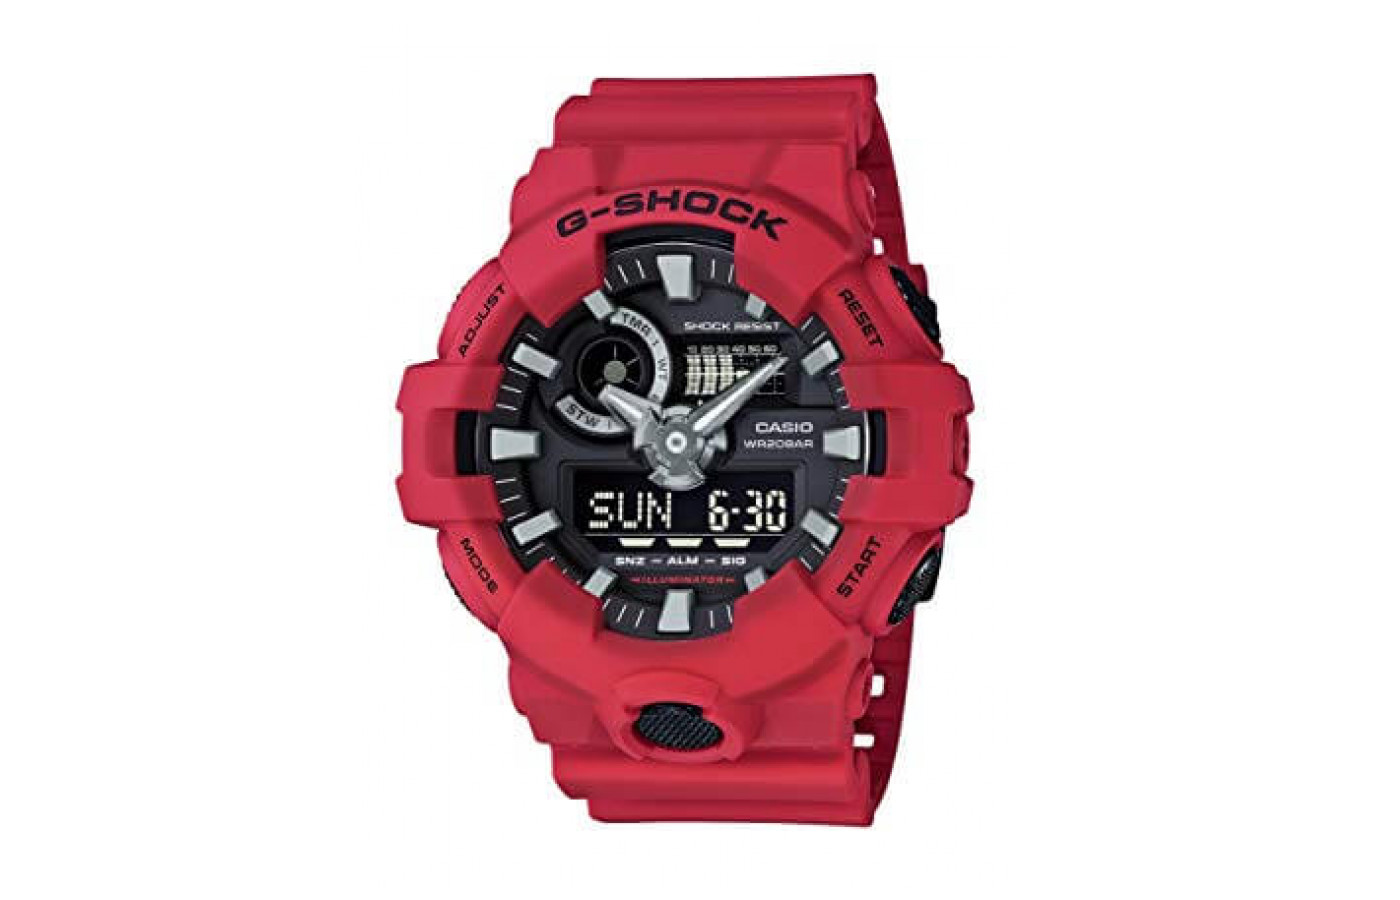 The G-Shock GA700-1B features a casing and band that's made from resin.